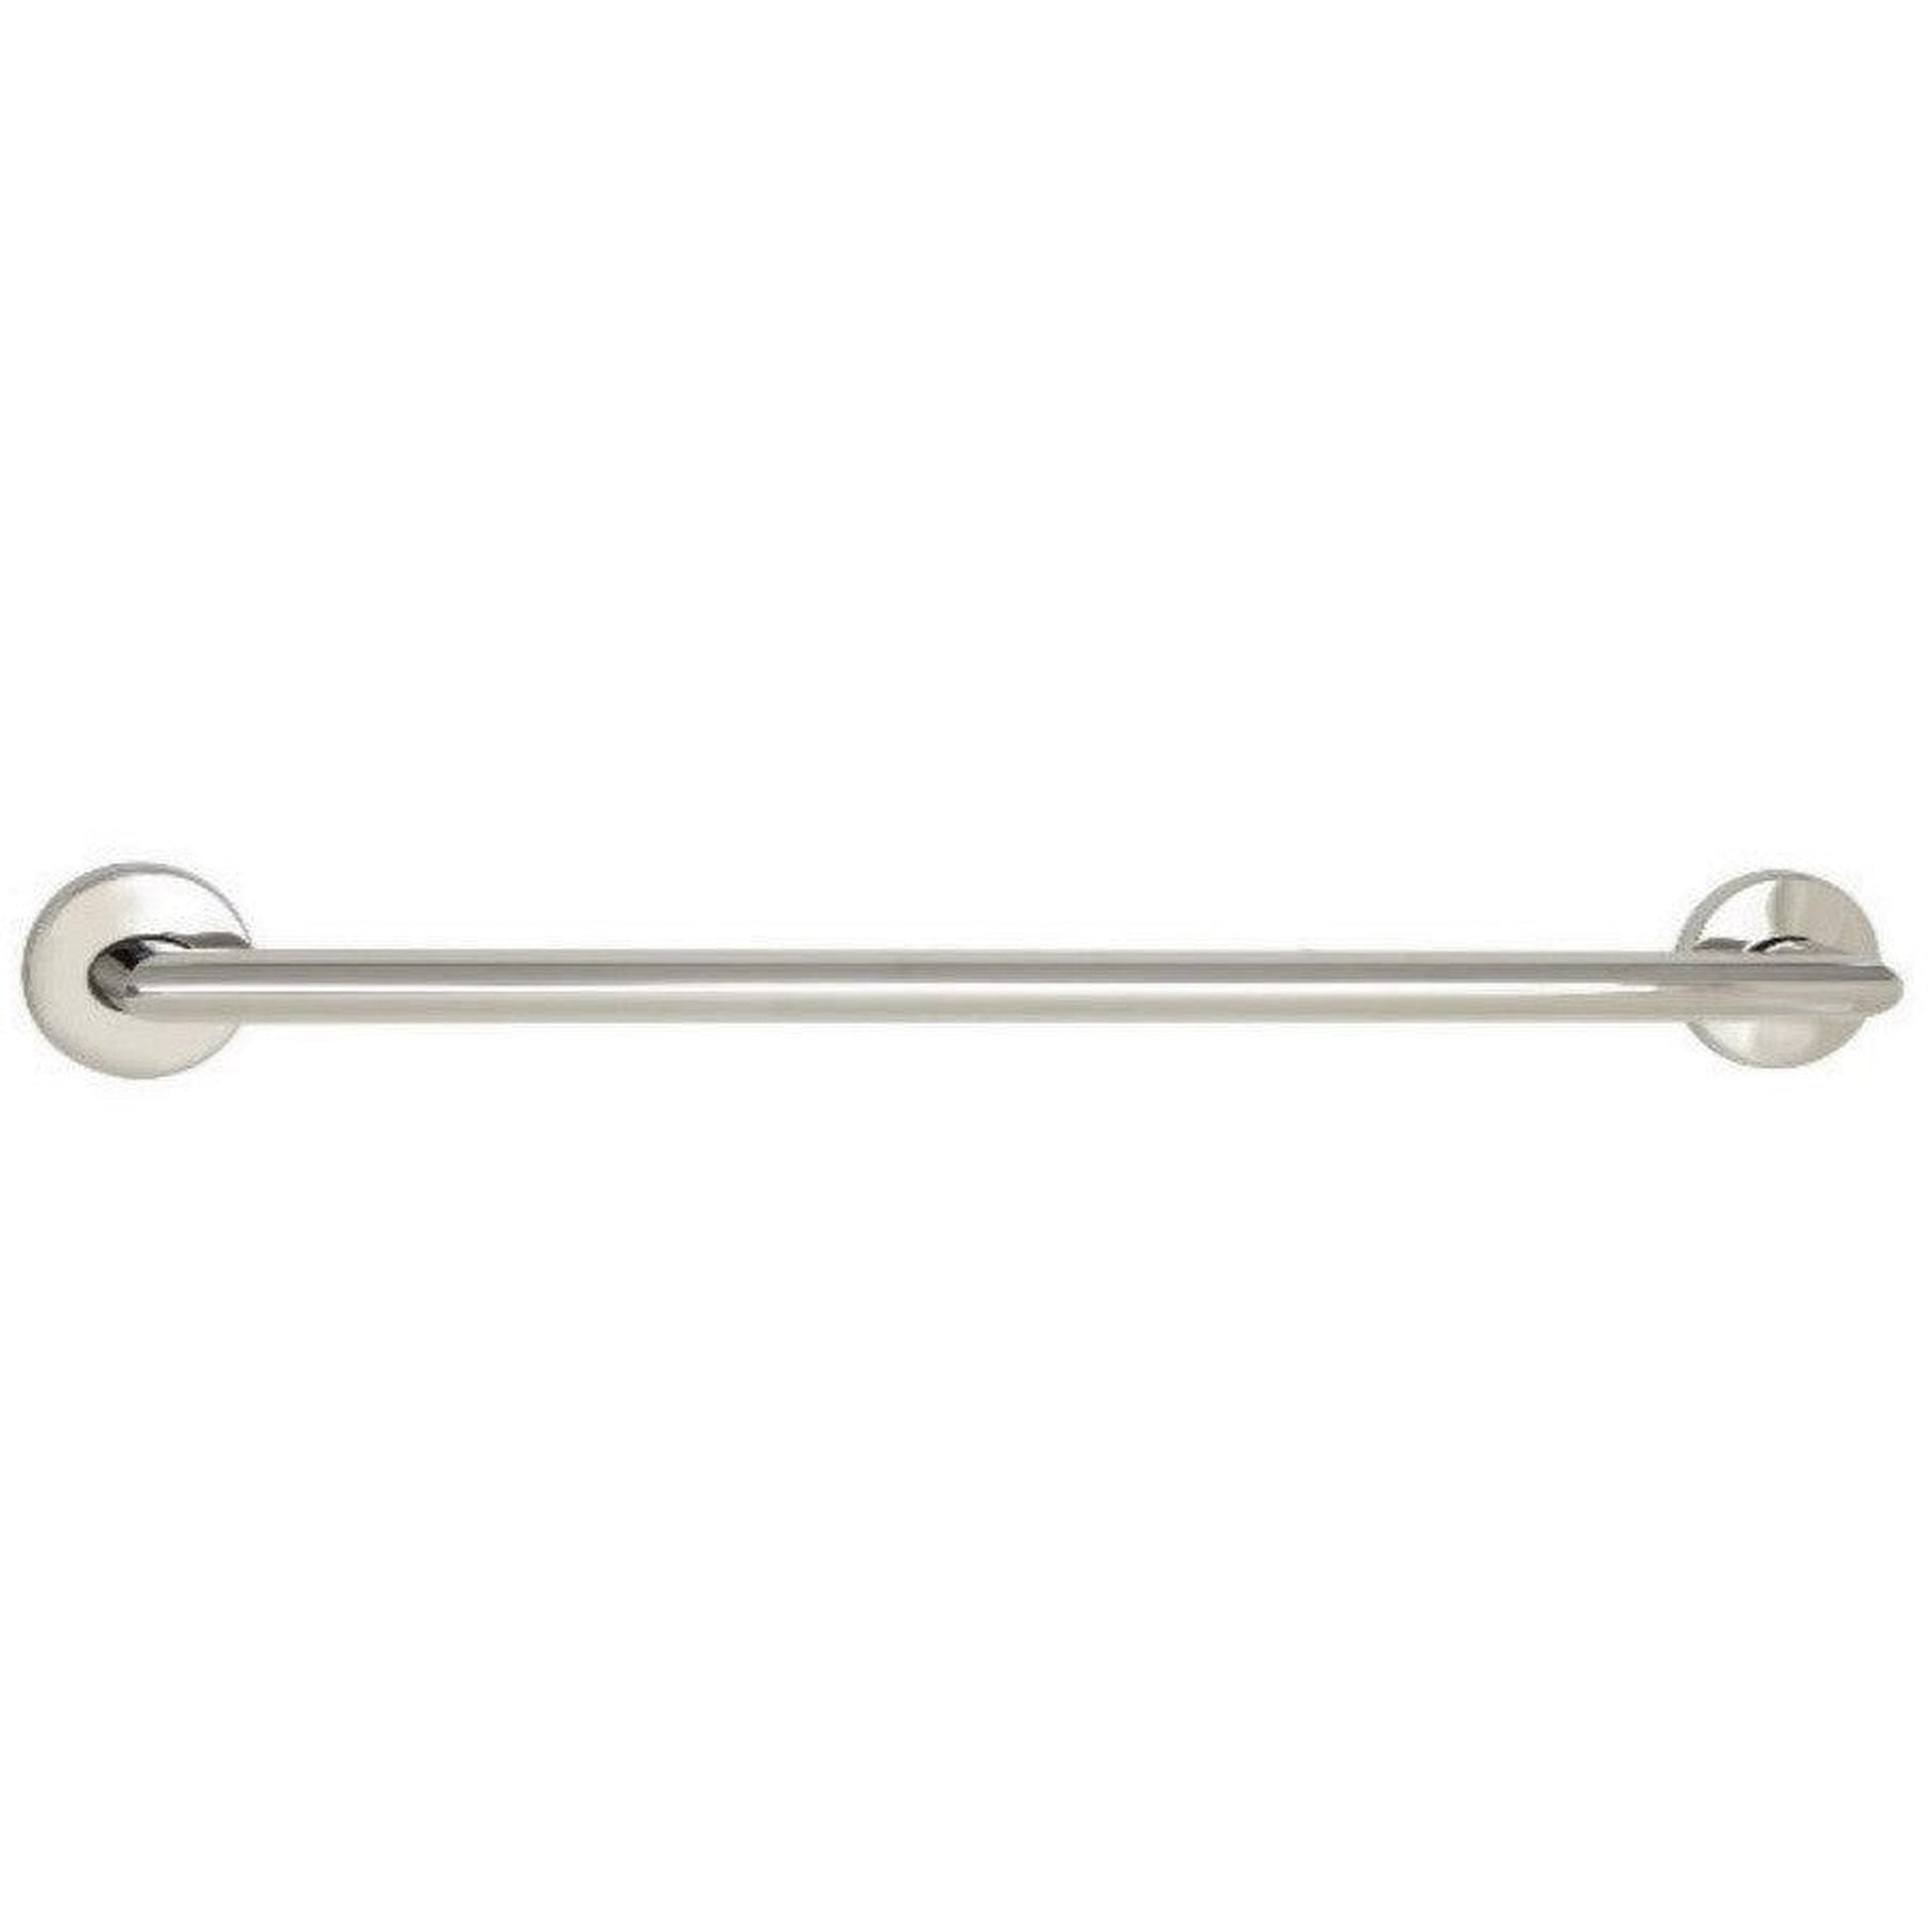 Seachrome Coronado 36" Polished Satinless Steel 1.5" Concealed Flanges Oval Grab Bar With Mitered Corners